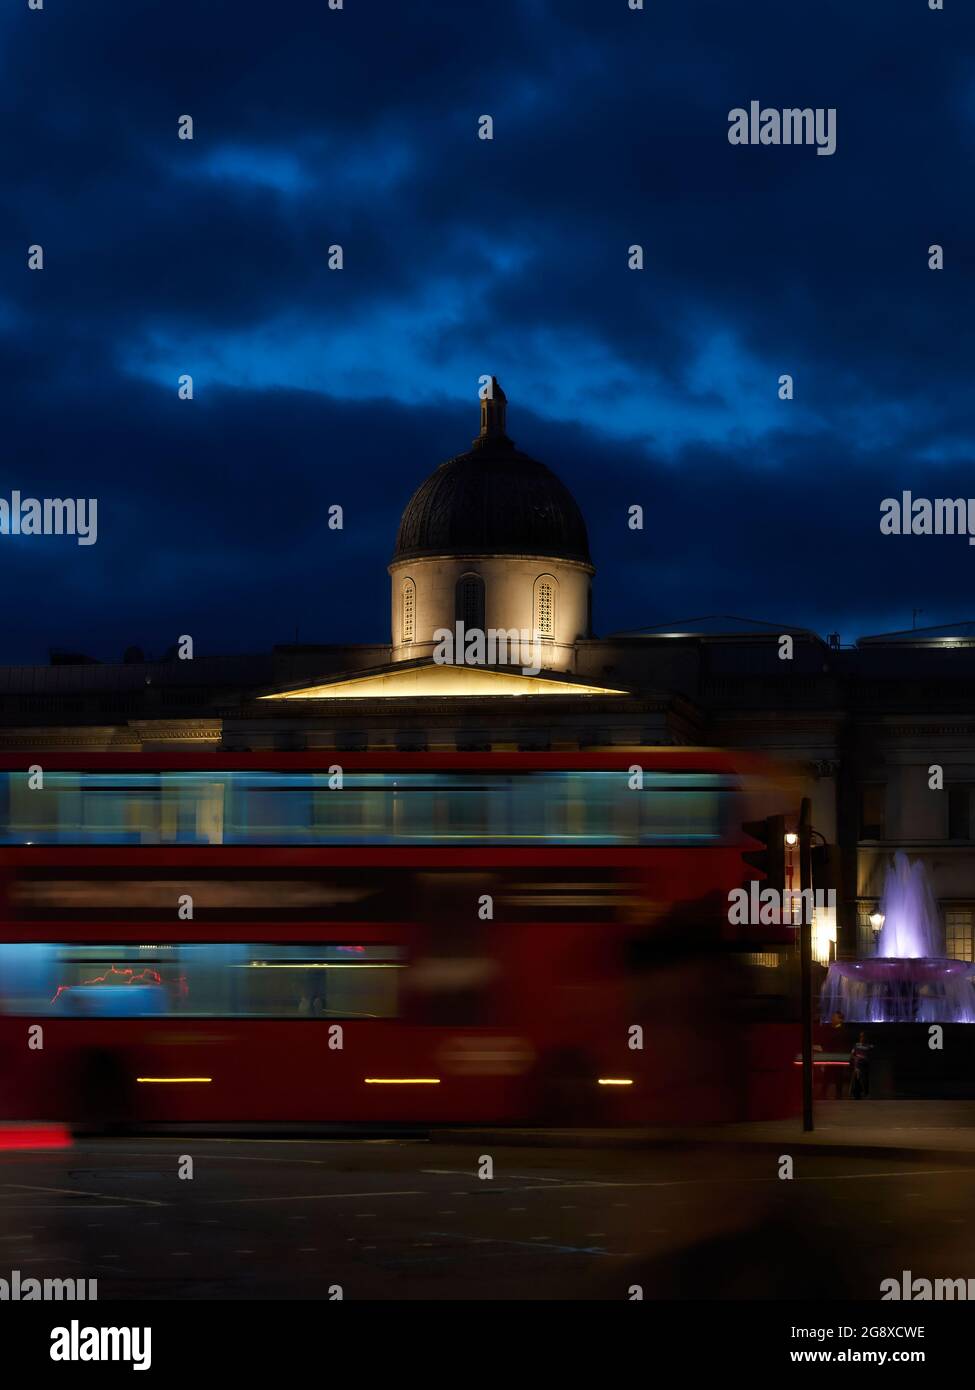 Energetic image showing a motion-blurred London Bus passing in front of a night-shouded National Gallery on Trafalgar Square. Stock Photo